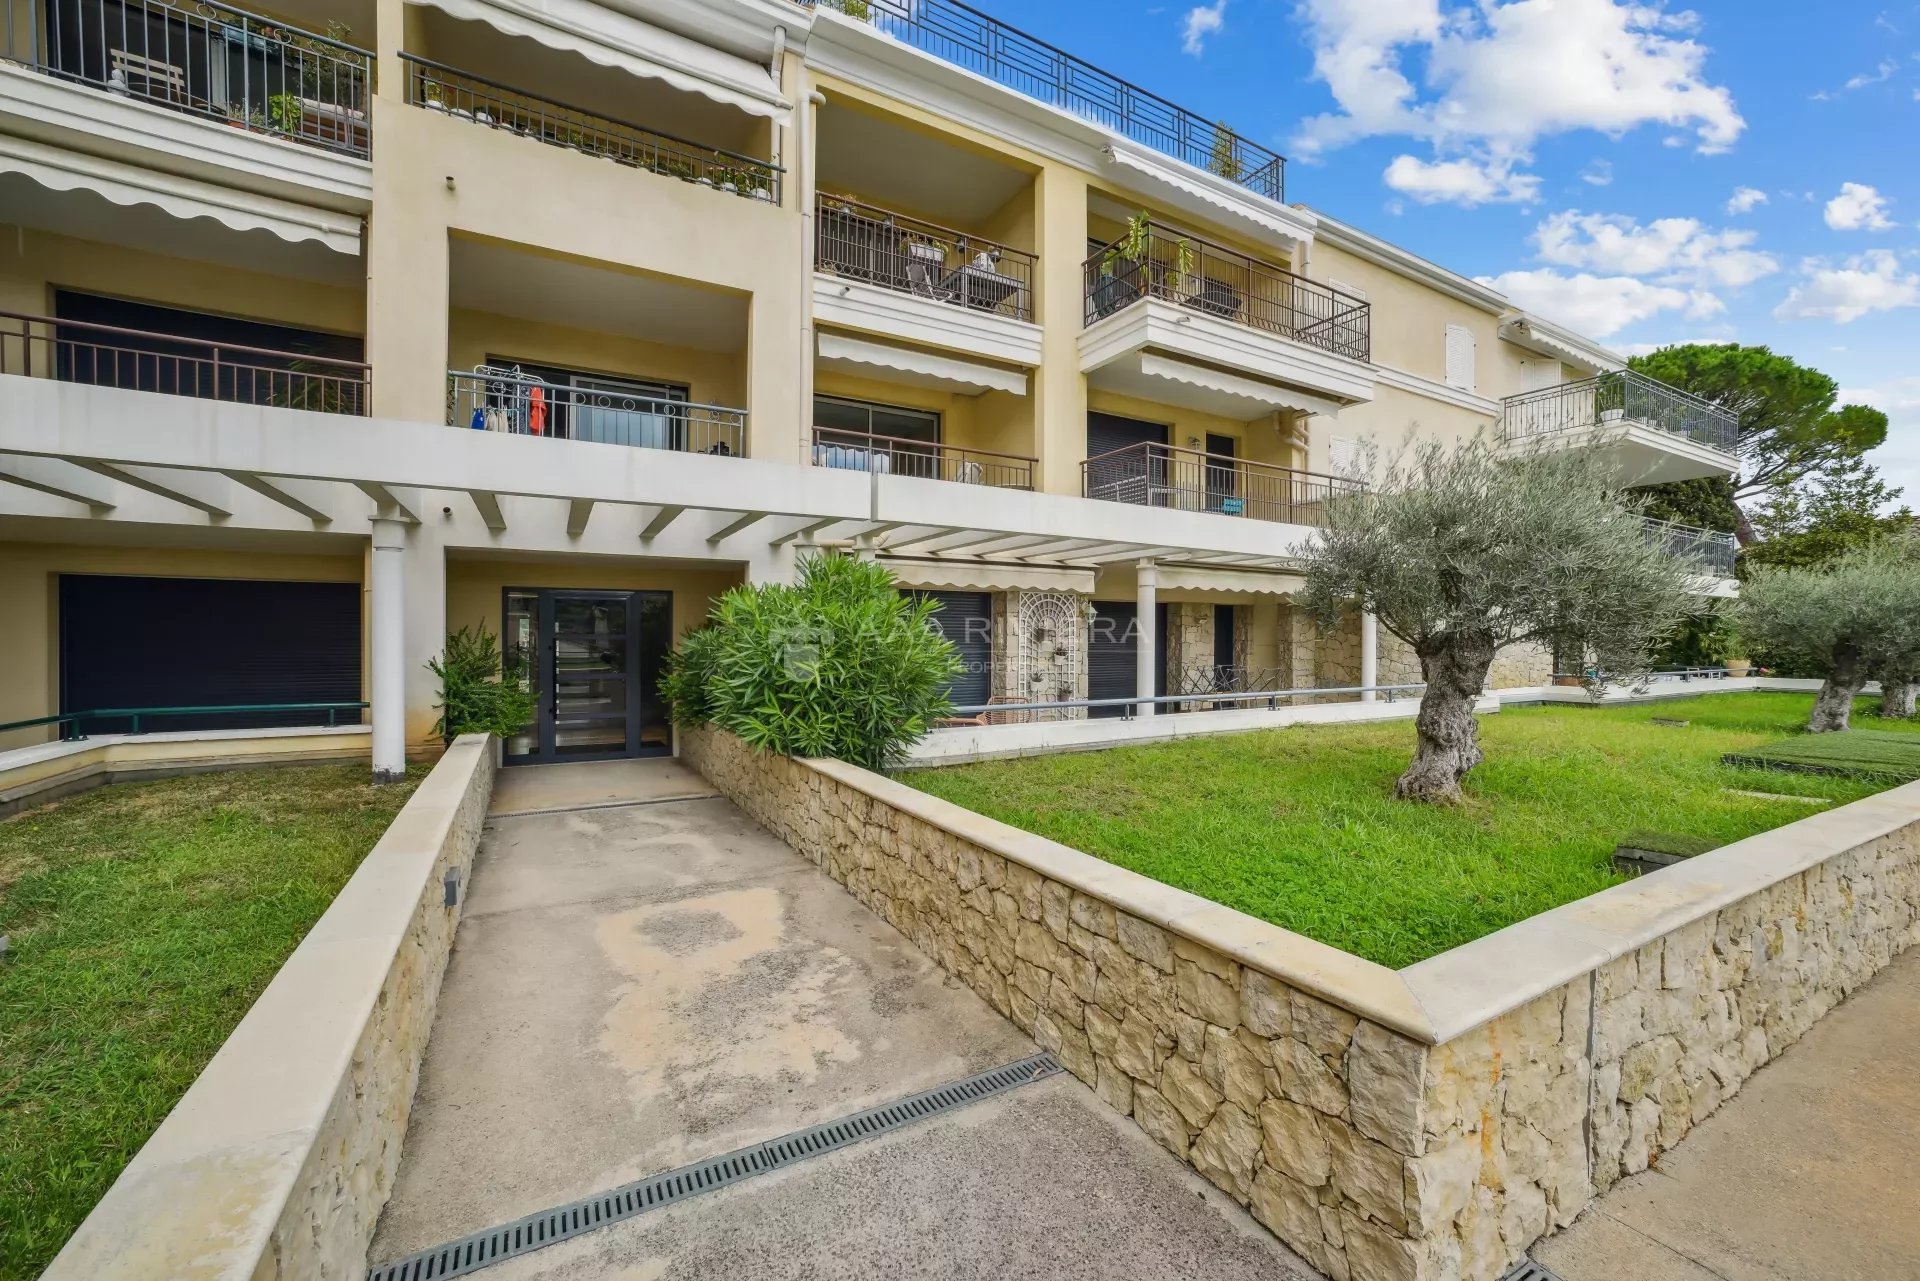 Sole Agent - Biot Village - Charming and modern 2 bedrooms apartment  with terrace and view. Pool, garage